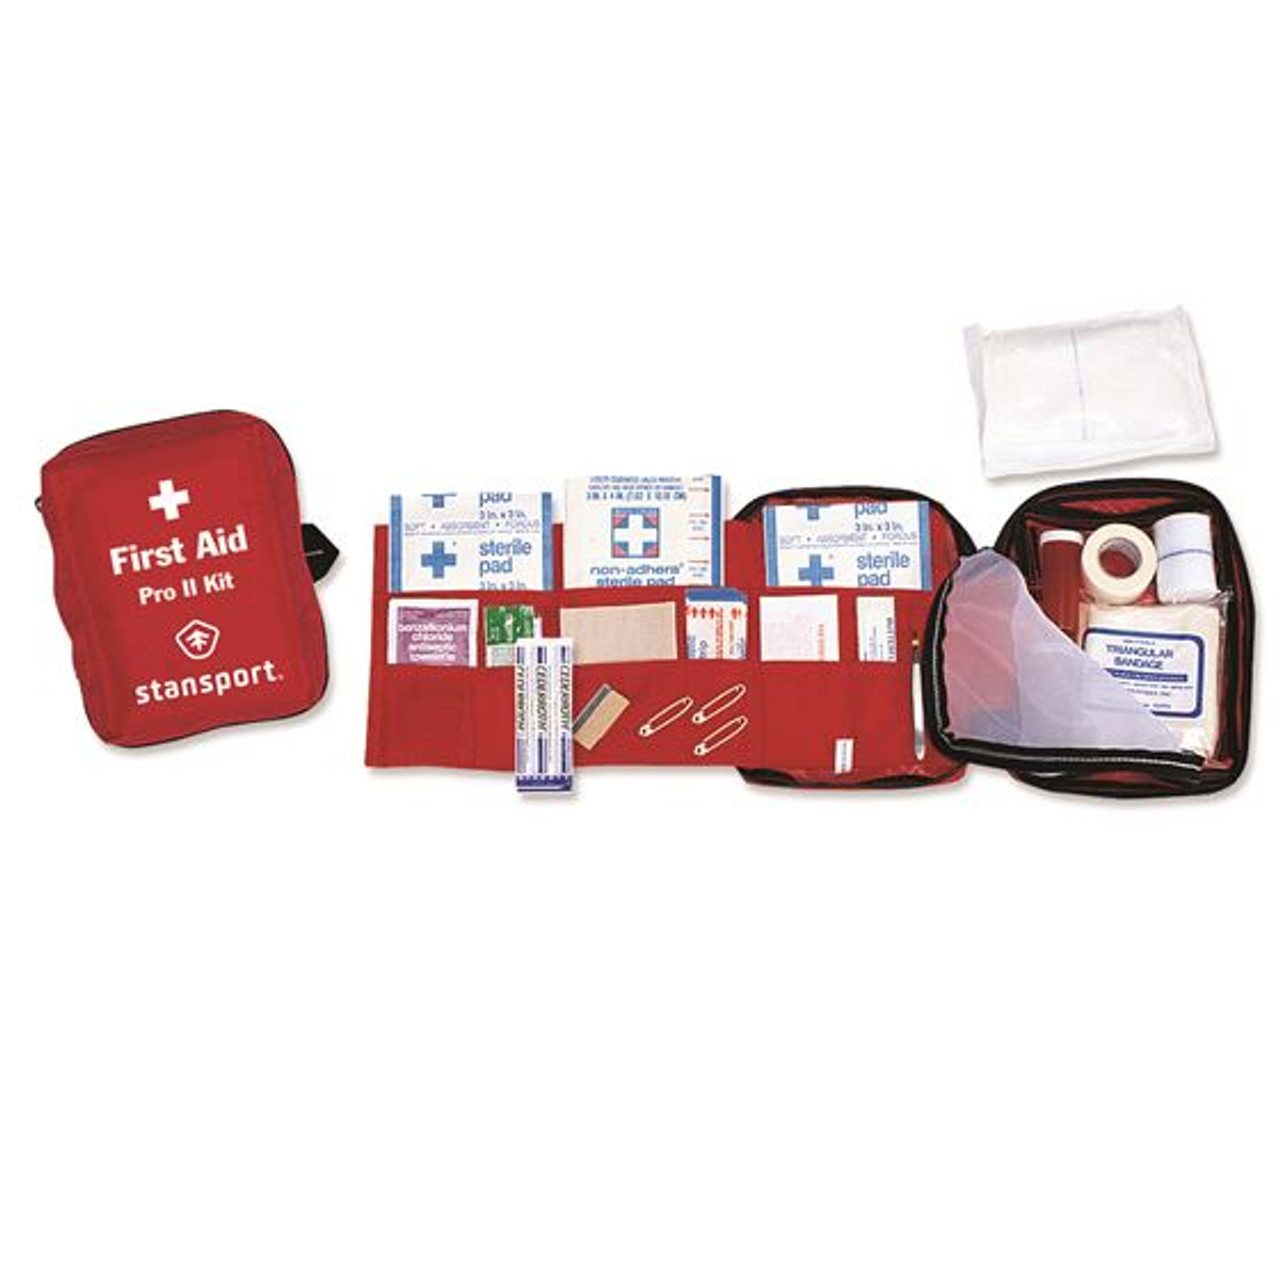 Stansport® Pro 11 First Aid Kit-ST634